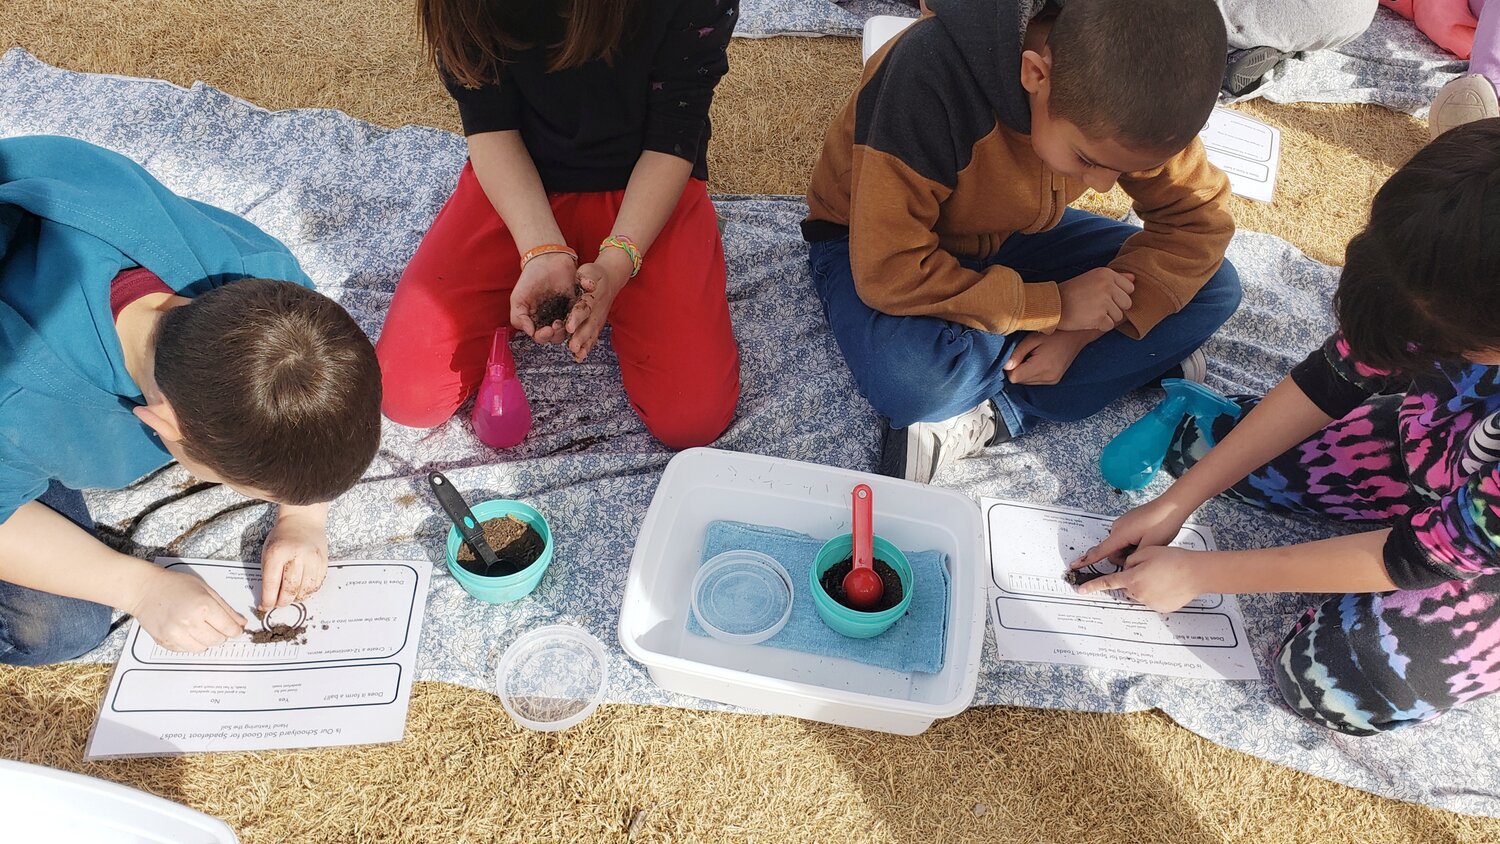 Central Elementary second graders practicing "hand texturing" soil to discover whether spadefoot toads have the correct type of soil to bury into under their playground.